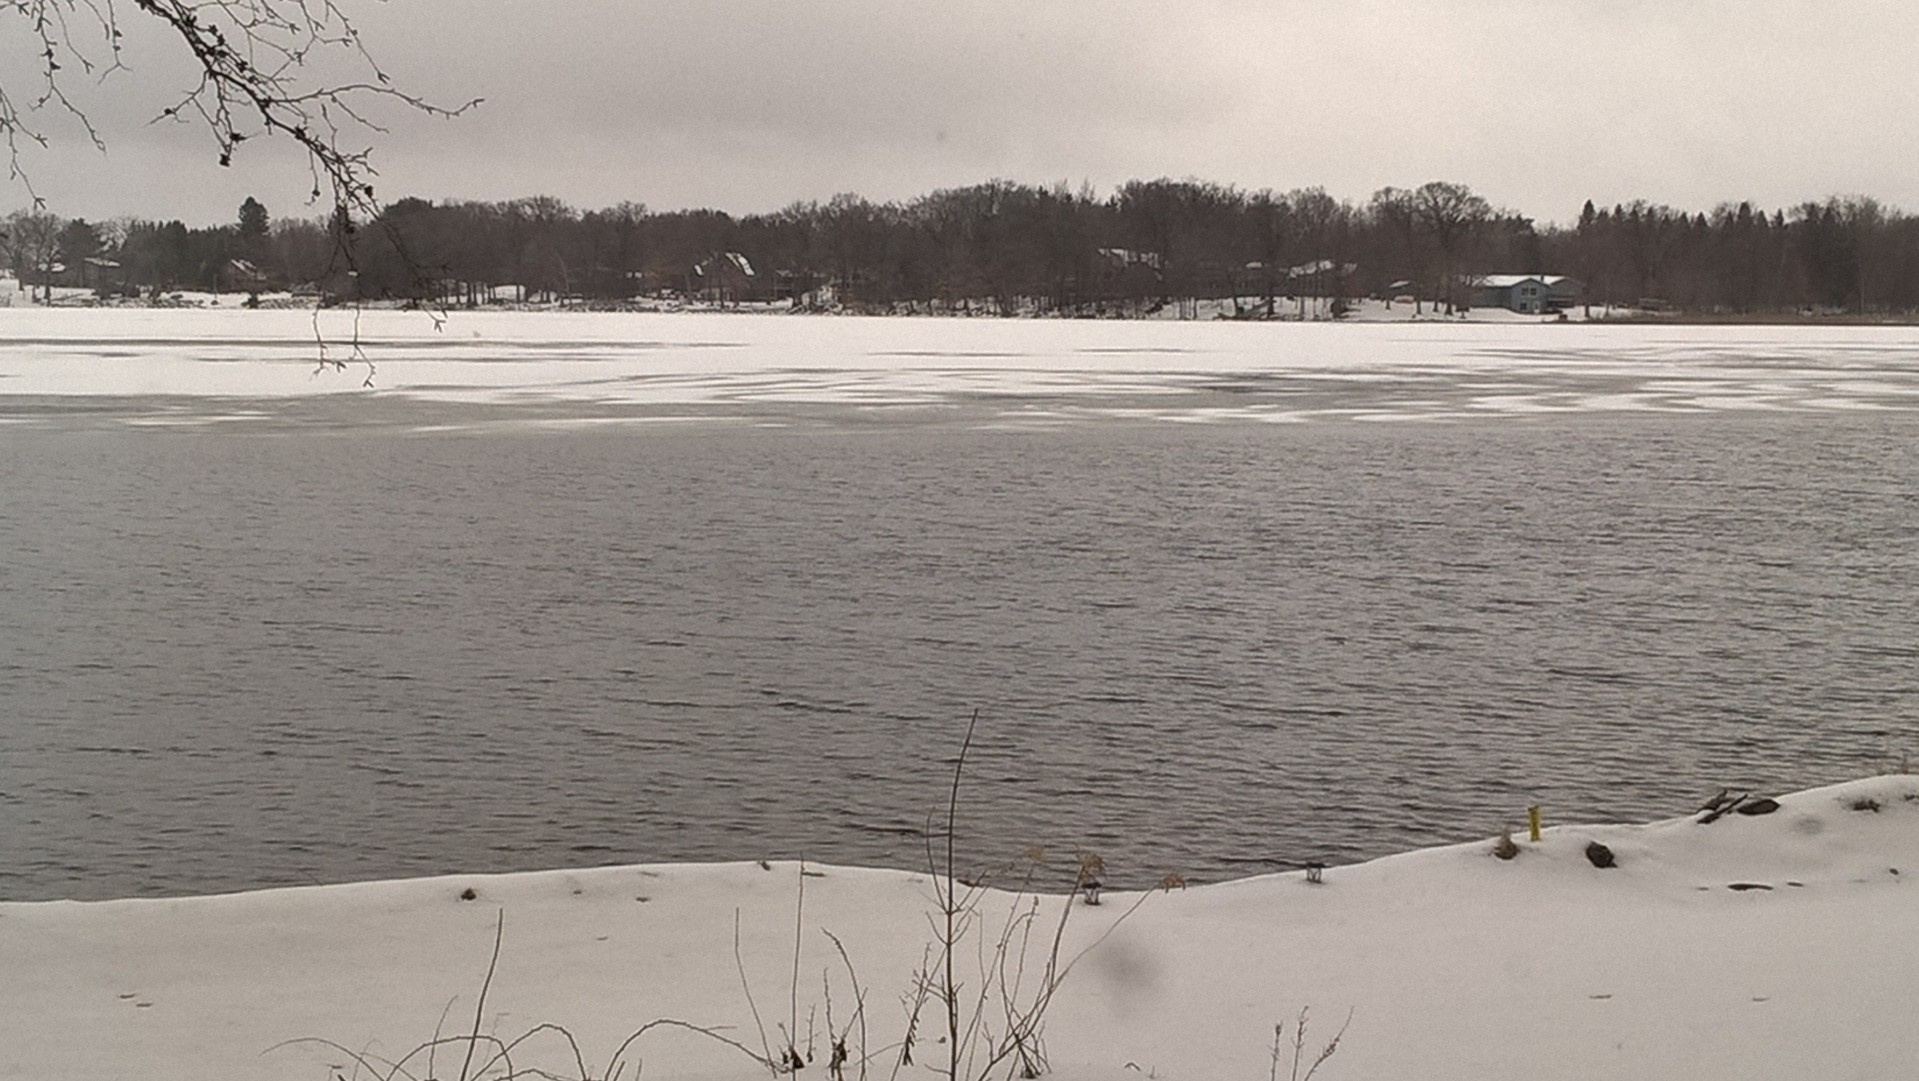 Ice going out on the lake, even during a snow storm.